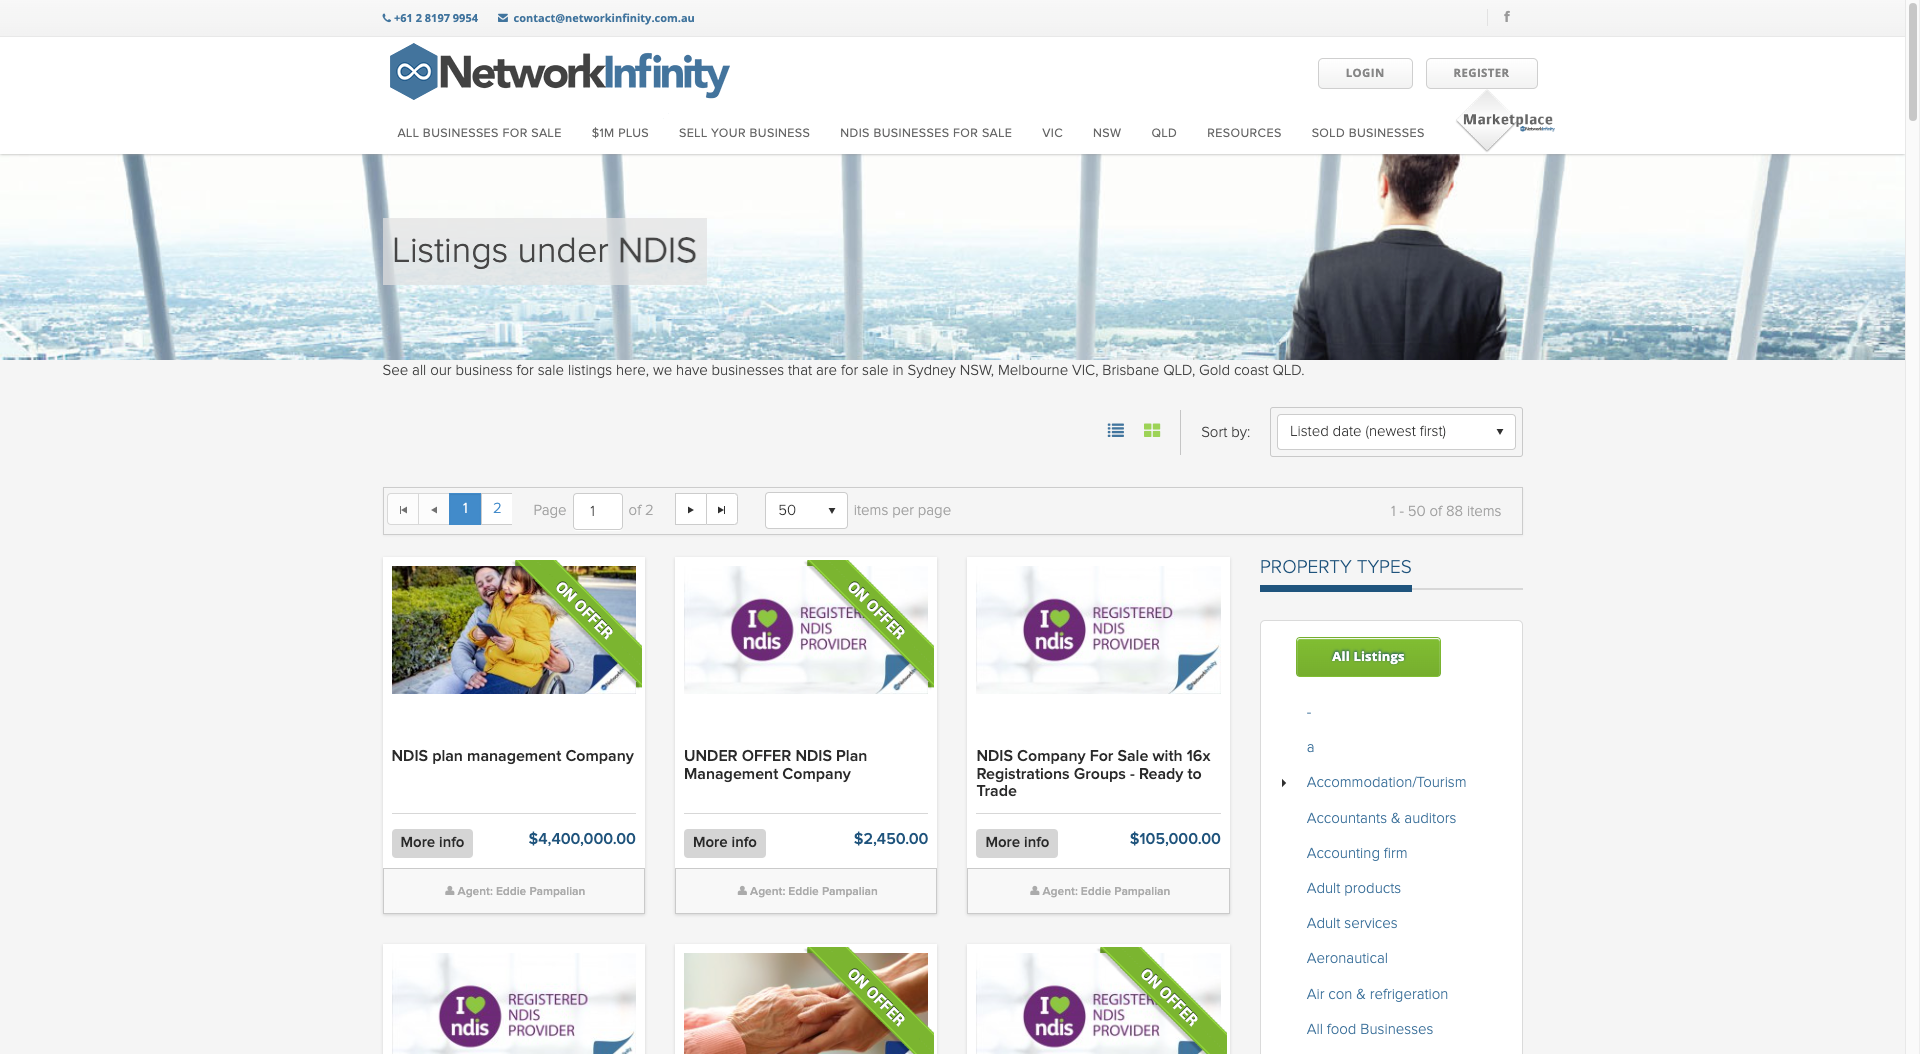 Network Infinity website screenshot for the page of NDIS businesses for sale